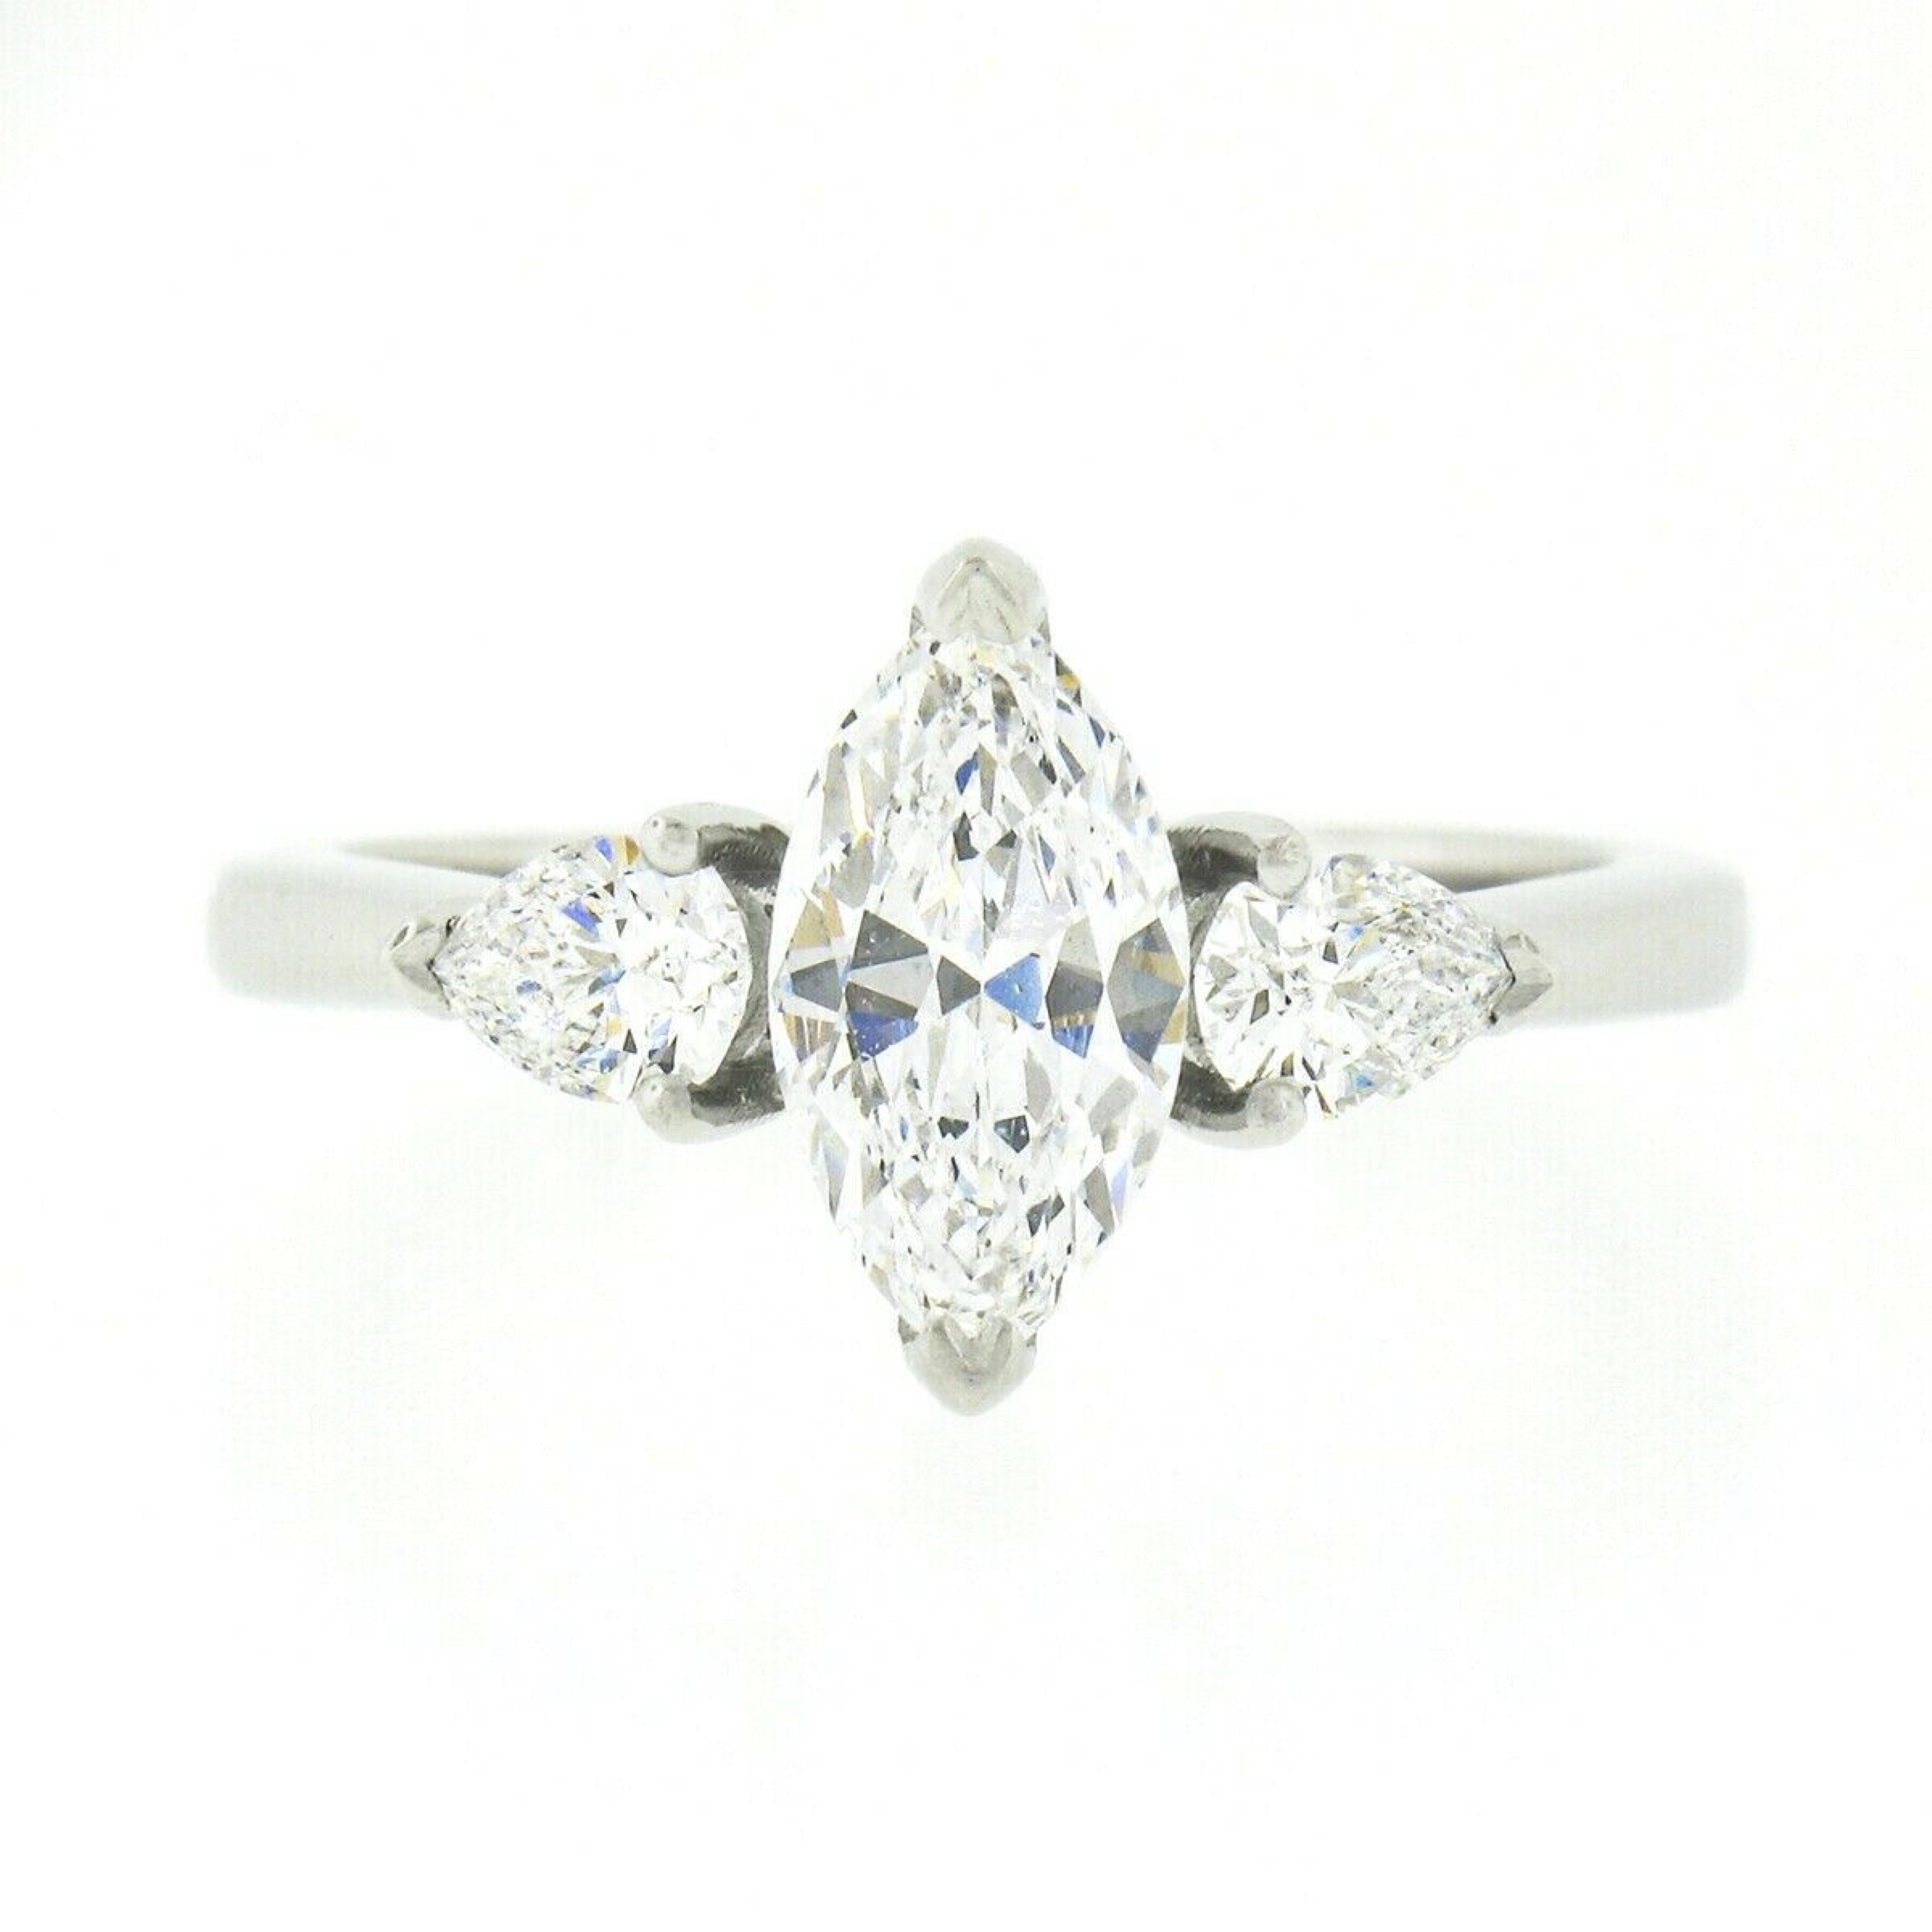 New Platinum 1.39ctw GIA E VVS Marquise Pear Diamond 3 Stone Engagement Ring In New Condition For Sale In Montclair, NJ